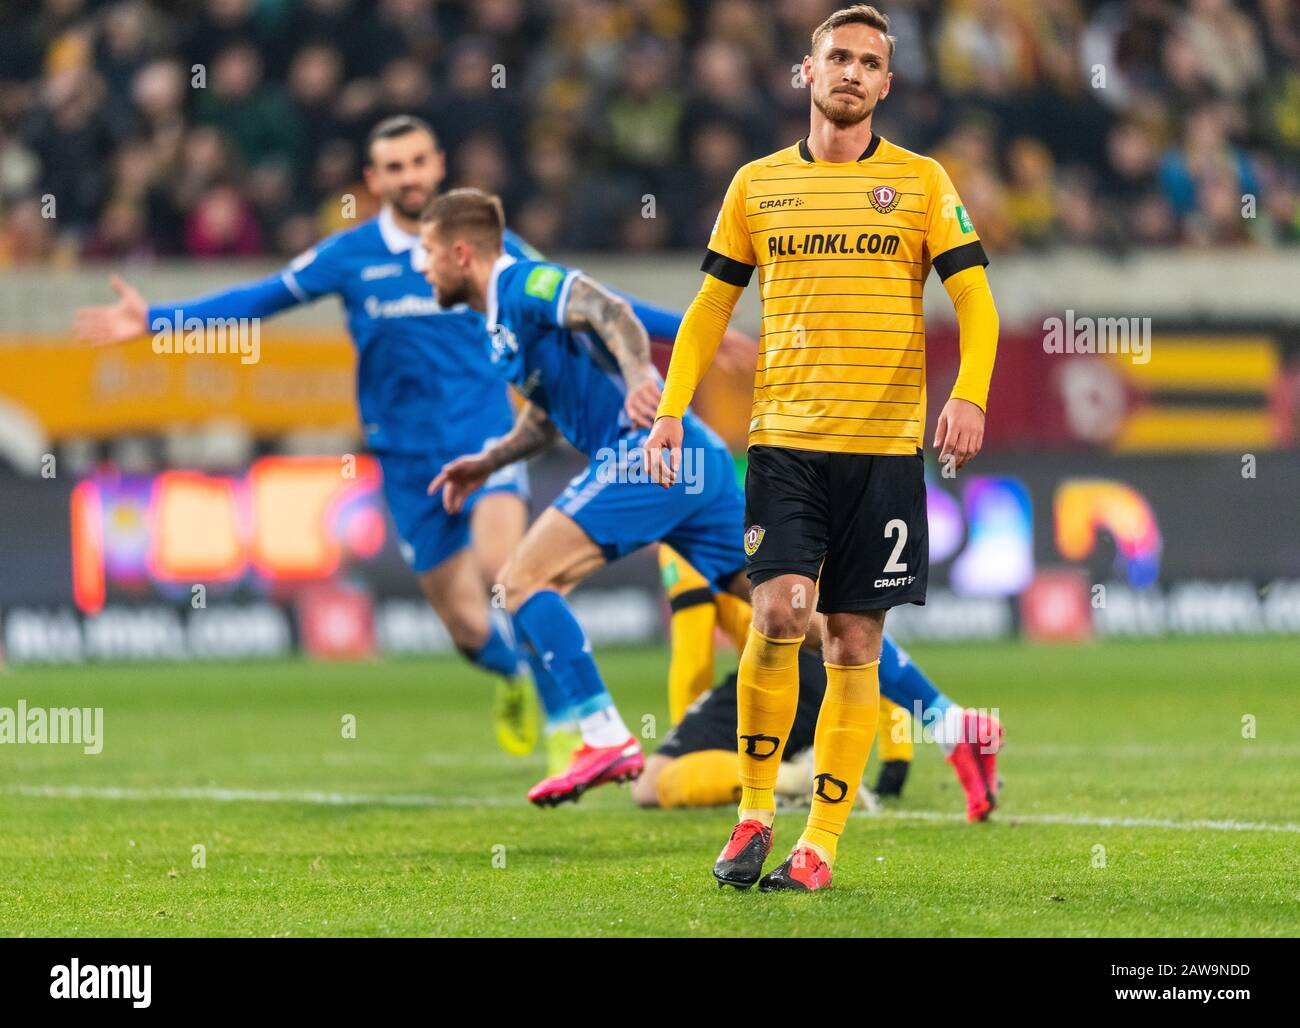 07 February 2020, Saxony, Dresden: Football: 2nd Bundesliga, SG Dynamo Dresden - SV Darmstadt 98, 21st matchday, at the Rudolf Harbig Stadium. Dynamos Linus Wahlqvist reacts disappointed while Darmstadt's Tobias Kempe (M) turns off to cheers after his goal for 1:2. Photo: Robert Michael/dpa-Zentralbild/dpa - IMPORTANT NOTE: In accordance with the regulations of the DFL Deutsche Fußball Liga and the DFB Deutscher Fußball-Bund, it is prohibited to exploit or have exploited in the stadium and/or from the game taken photographs in the form of sequence images and/or video-like photo series. Stock Photo